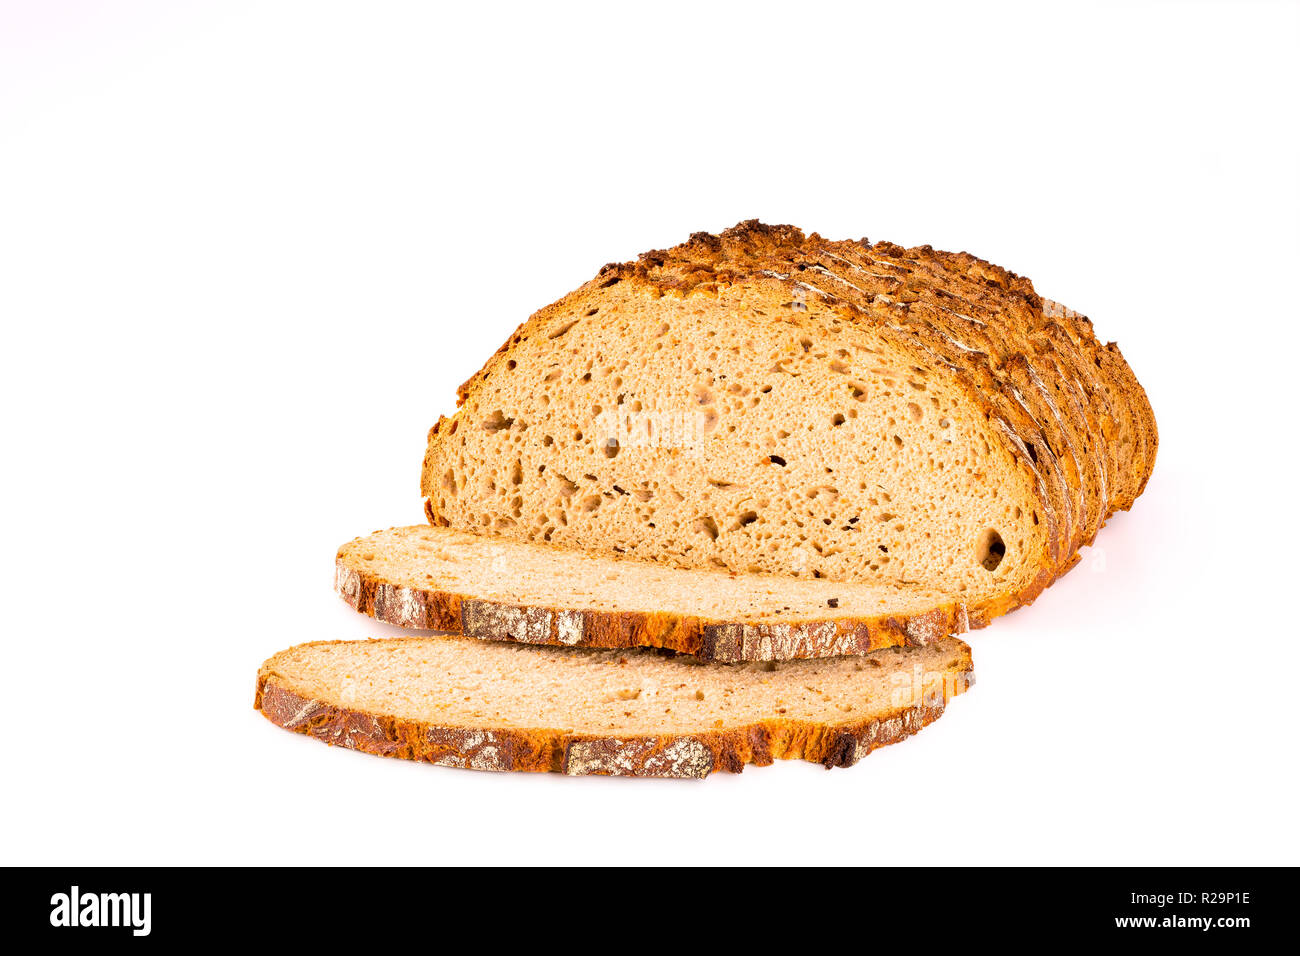 Loaf and slices of bread isolated on white background, front view, closeup. Stock Photo